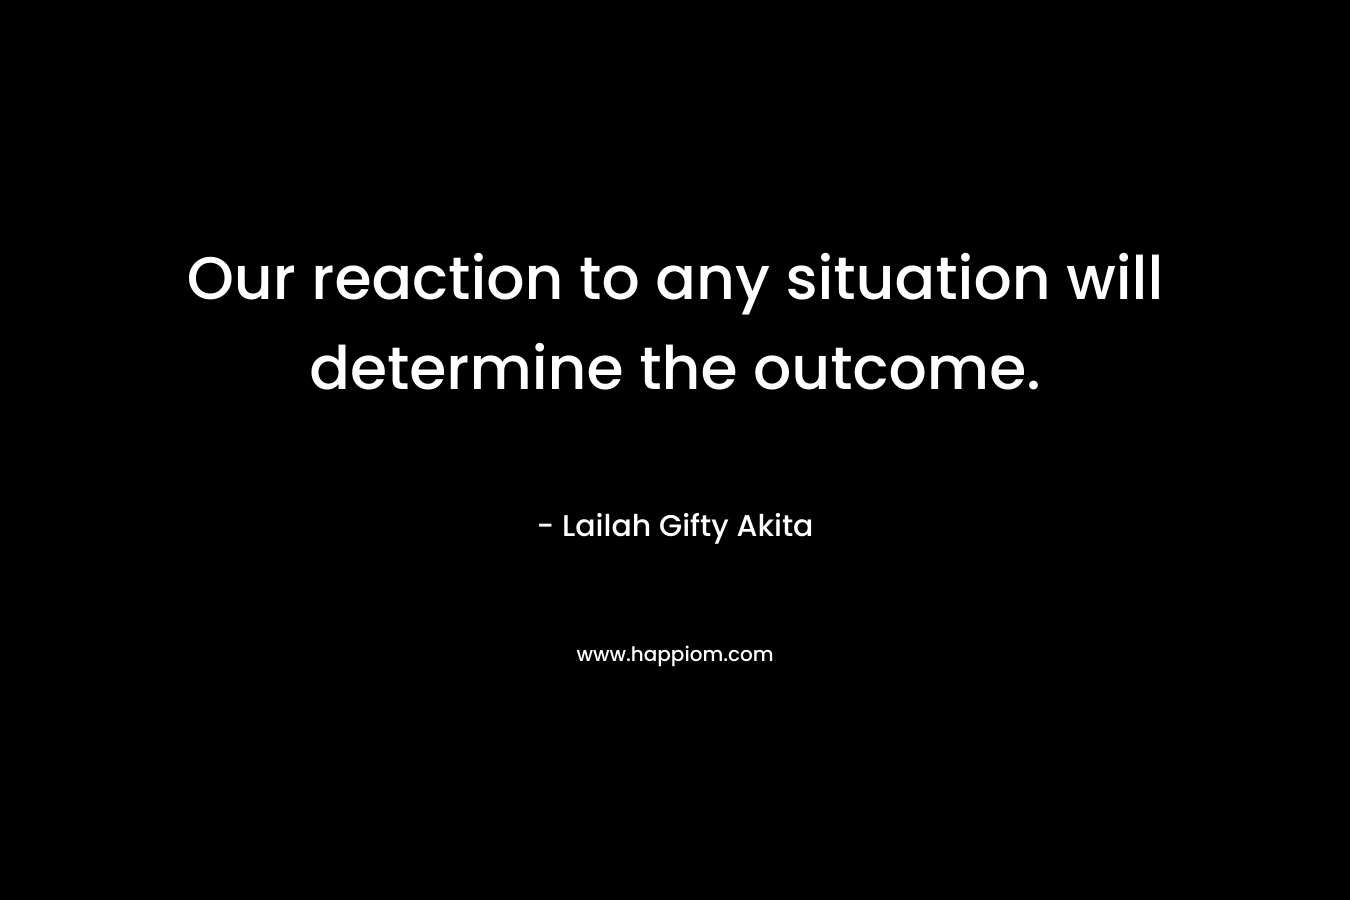 Our reaction to any situation will determine the outcome.